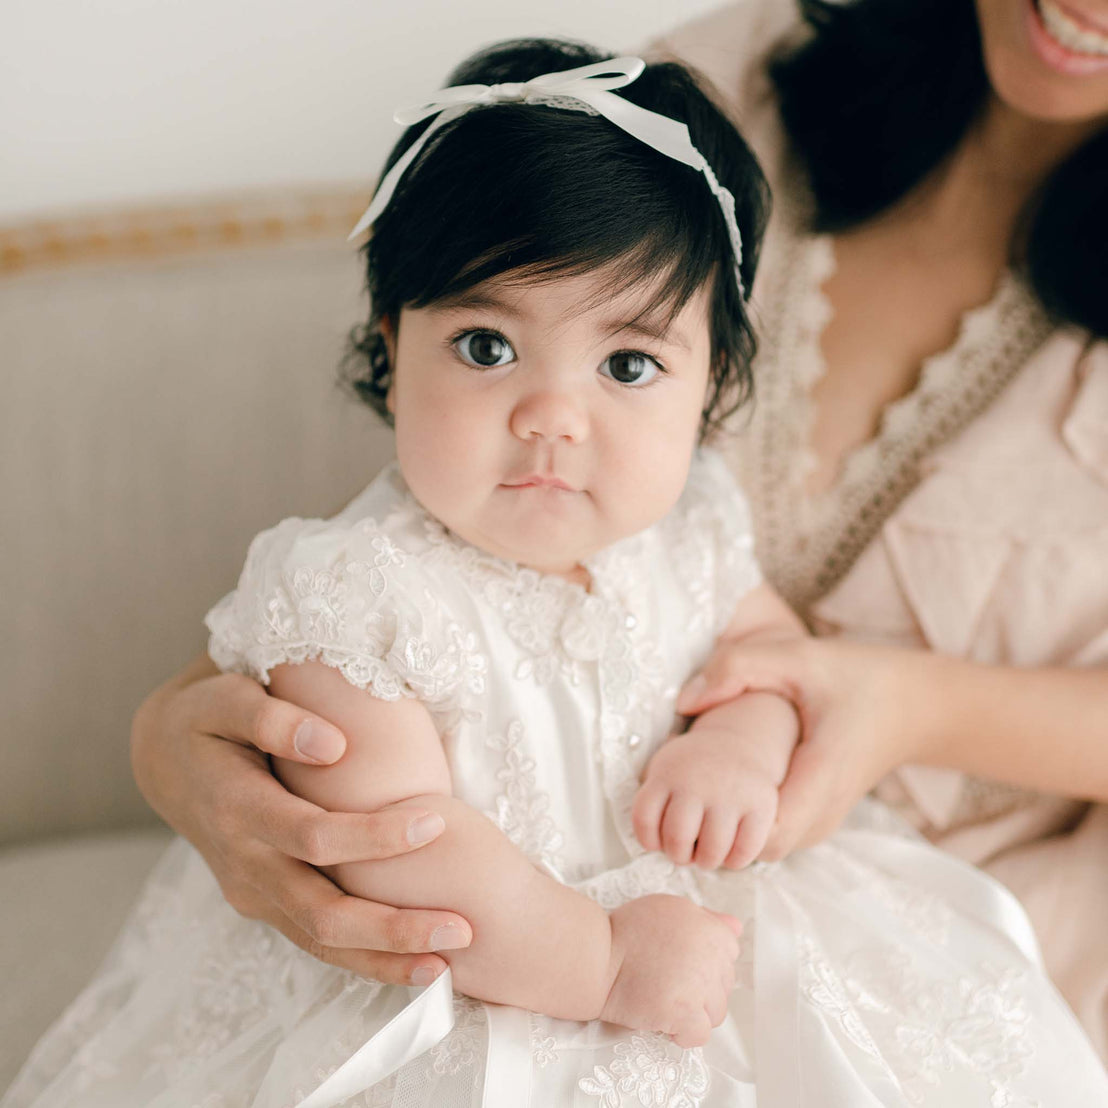 Baby girl lace and silk bow headband shown with Penelope gown for christening style inspiration